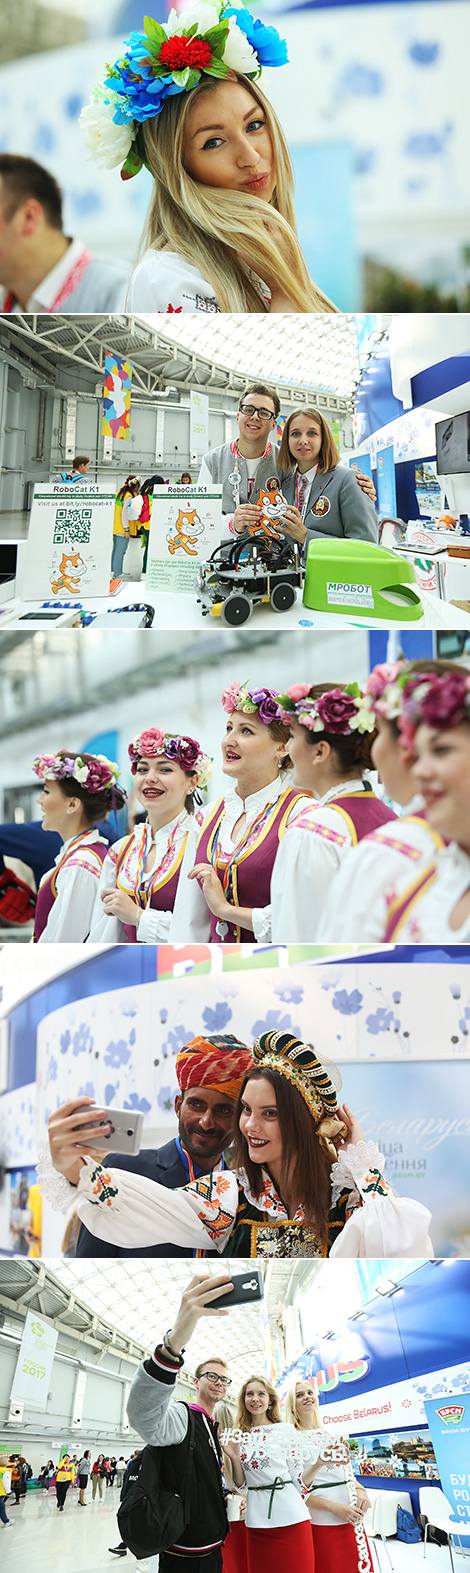 Belarus at 2017 World Festival of Youth and Students in Sochi 